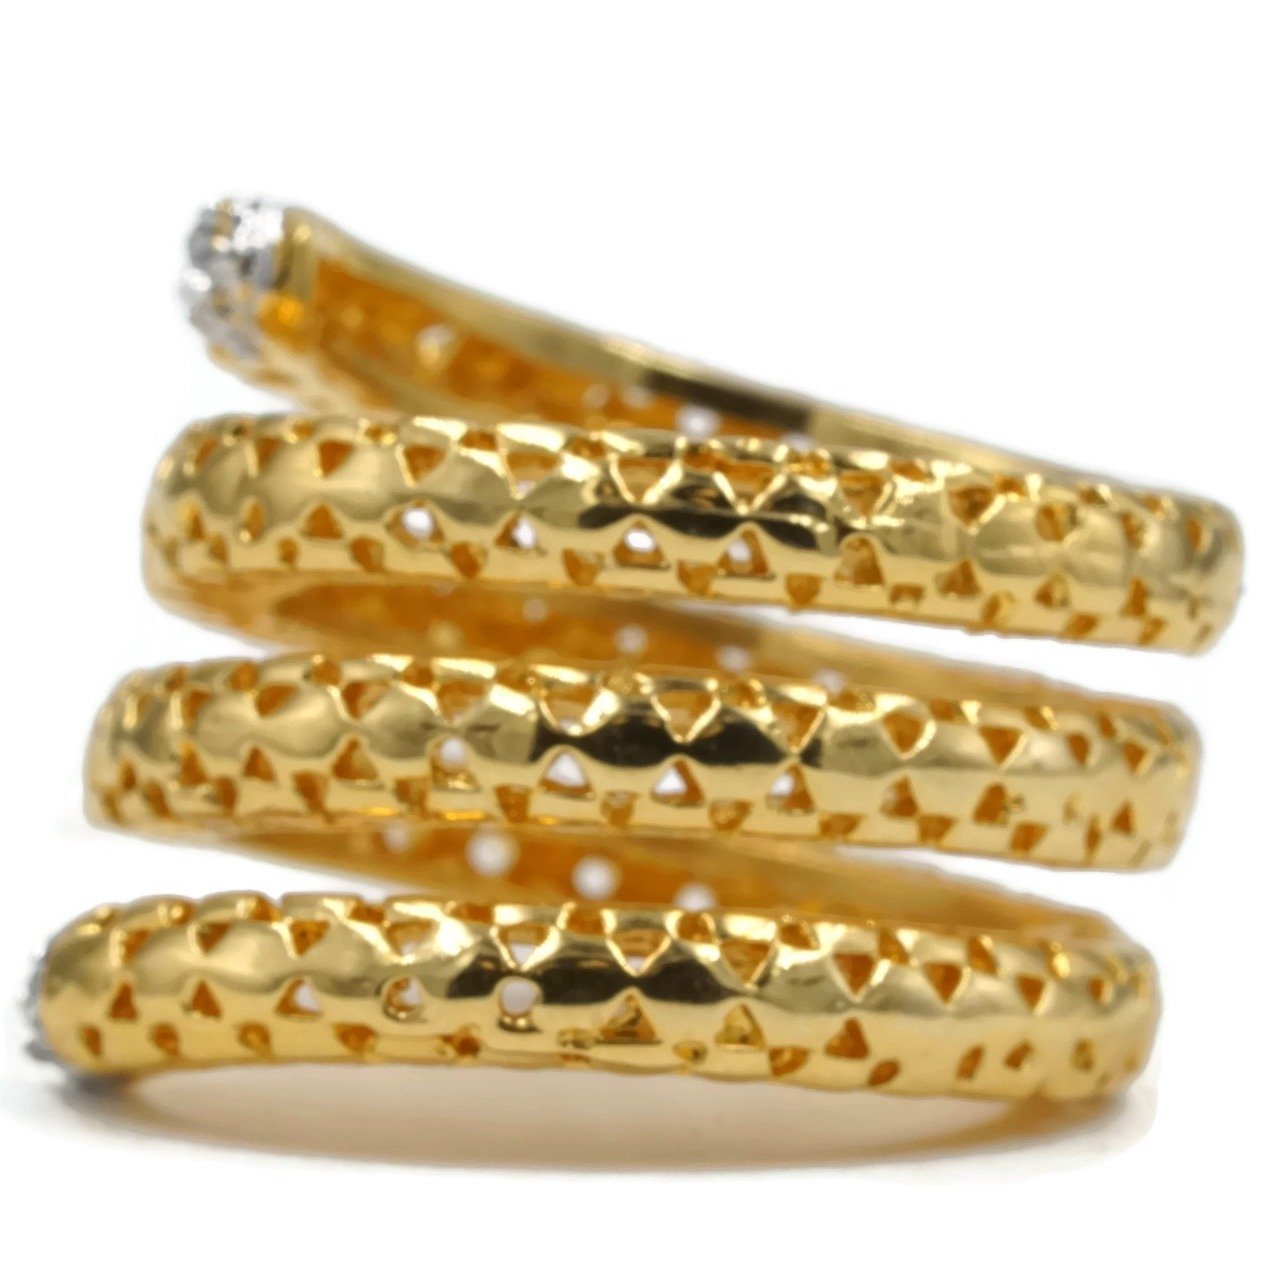 Perforated Lightweight Snake Ring with Silvertone Accents - Two Tone and Gold Electroplate - Size Guide Included - Rings - Bijou Her -  -  - 